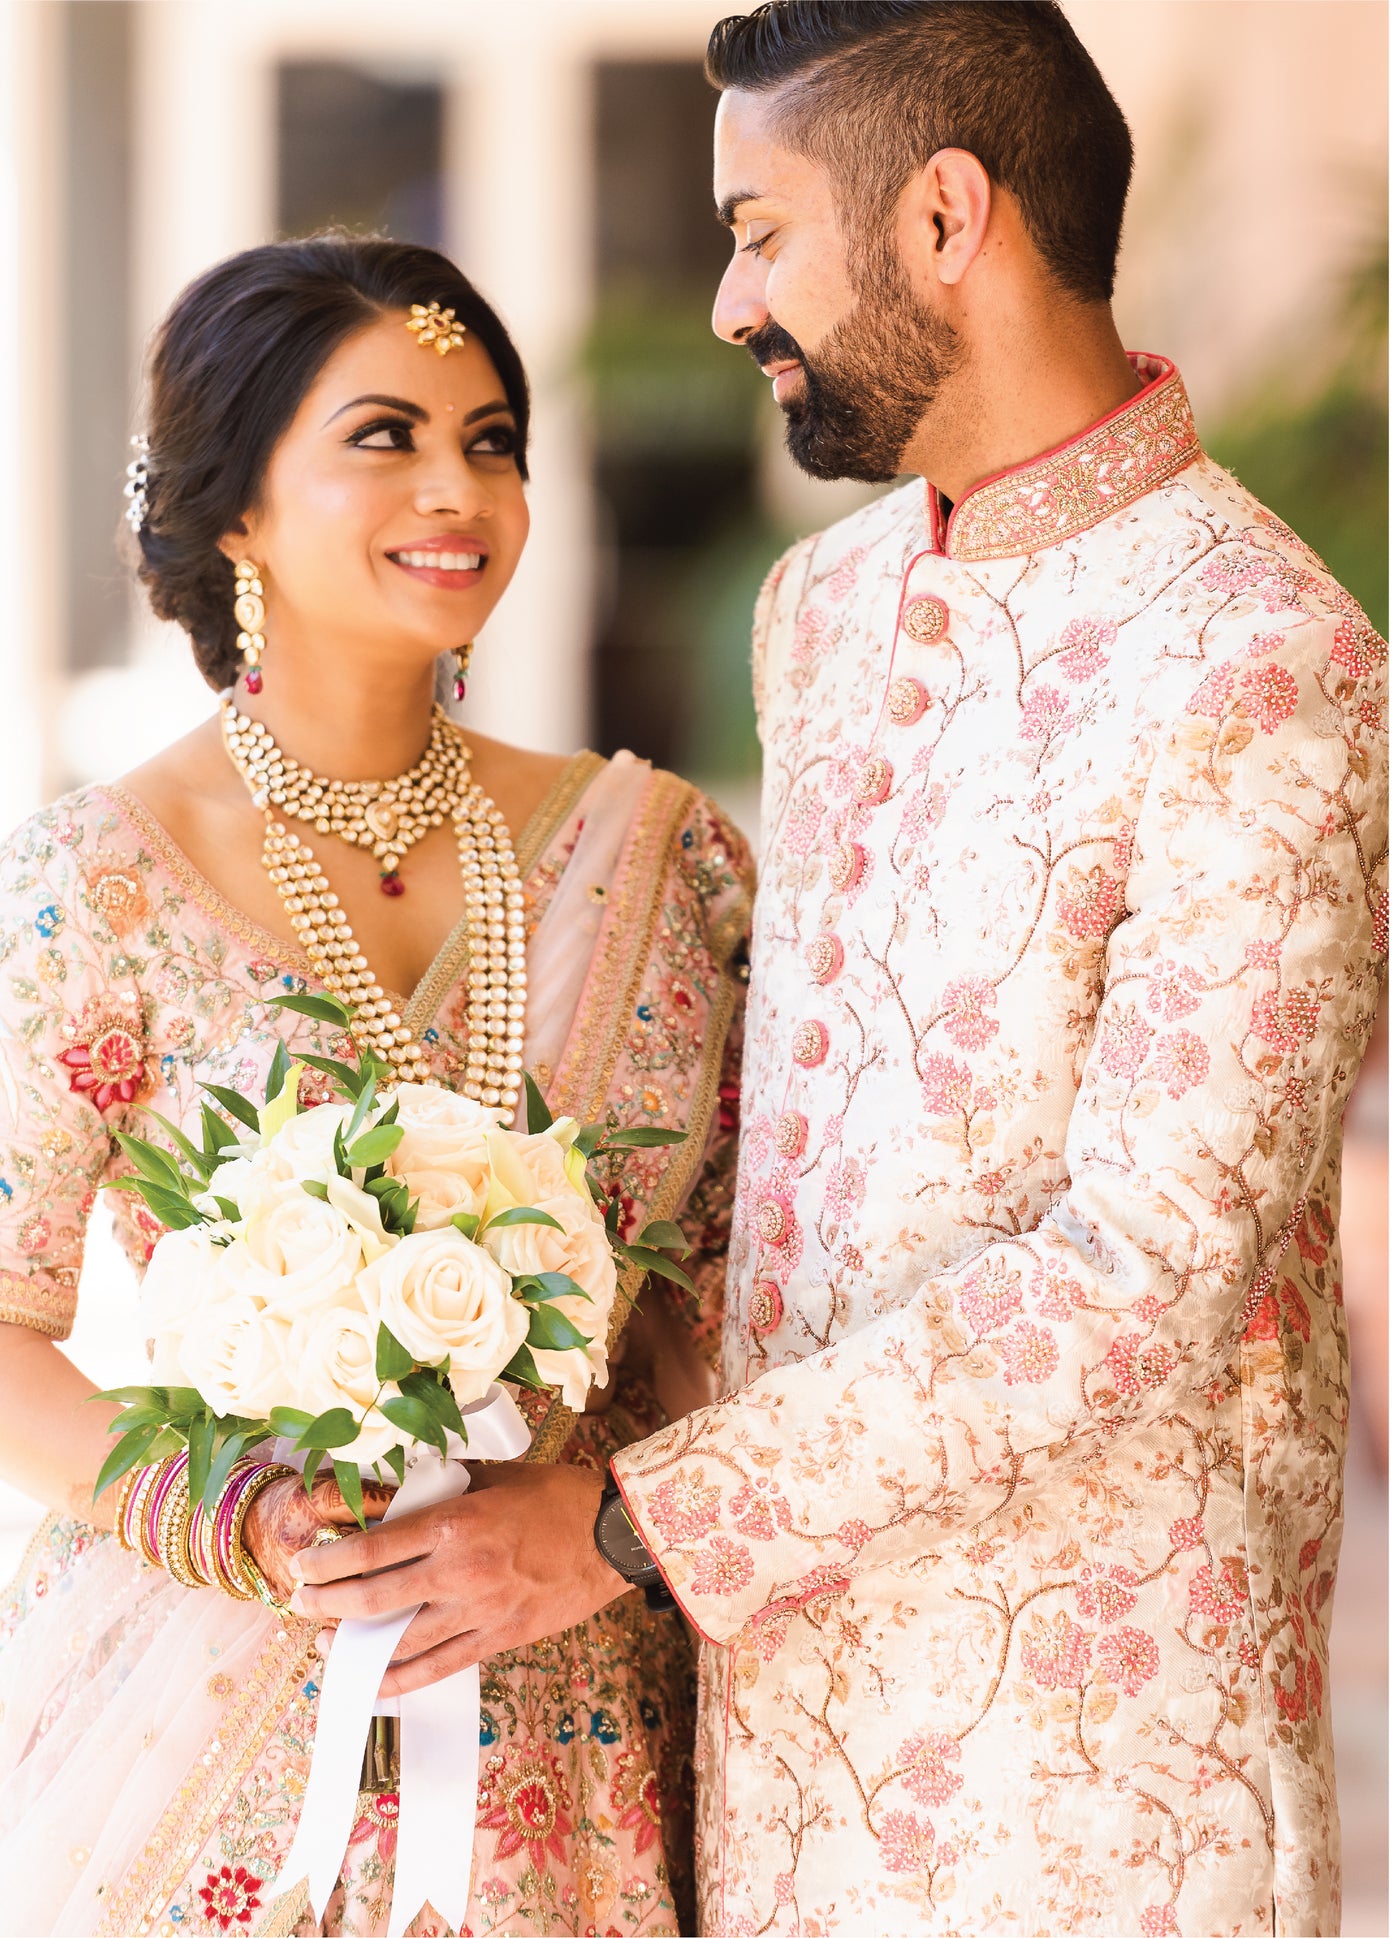 Gorgeous Styles To Coordinate Bride and Groom Outfits – Yes Madam